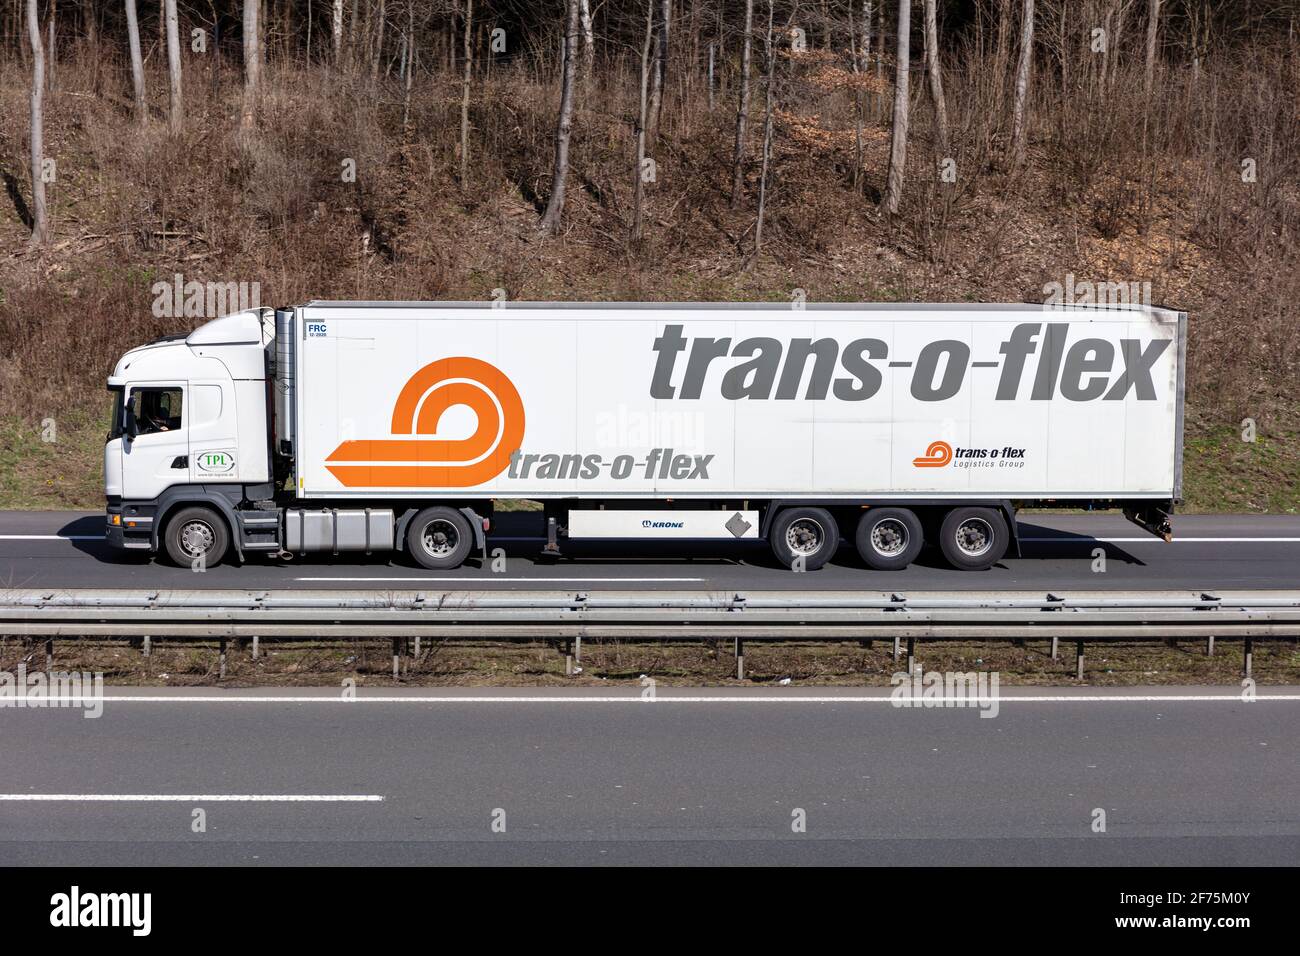 TPL Logitstik Scania truck with trans-o-flex temperature controlled trailer on motorway. Stock Photo